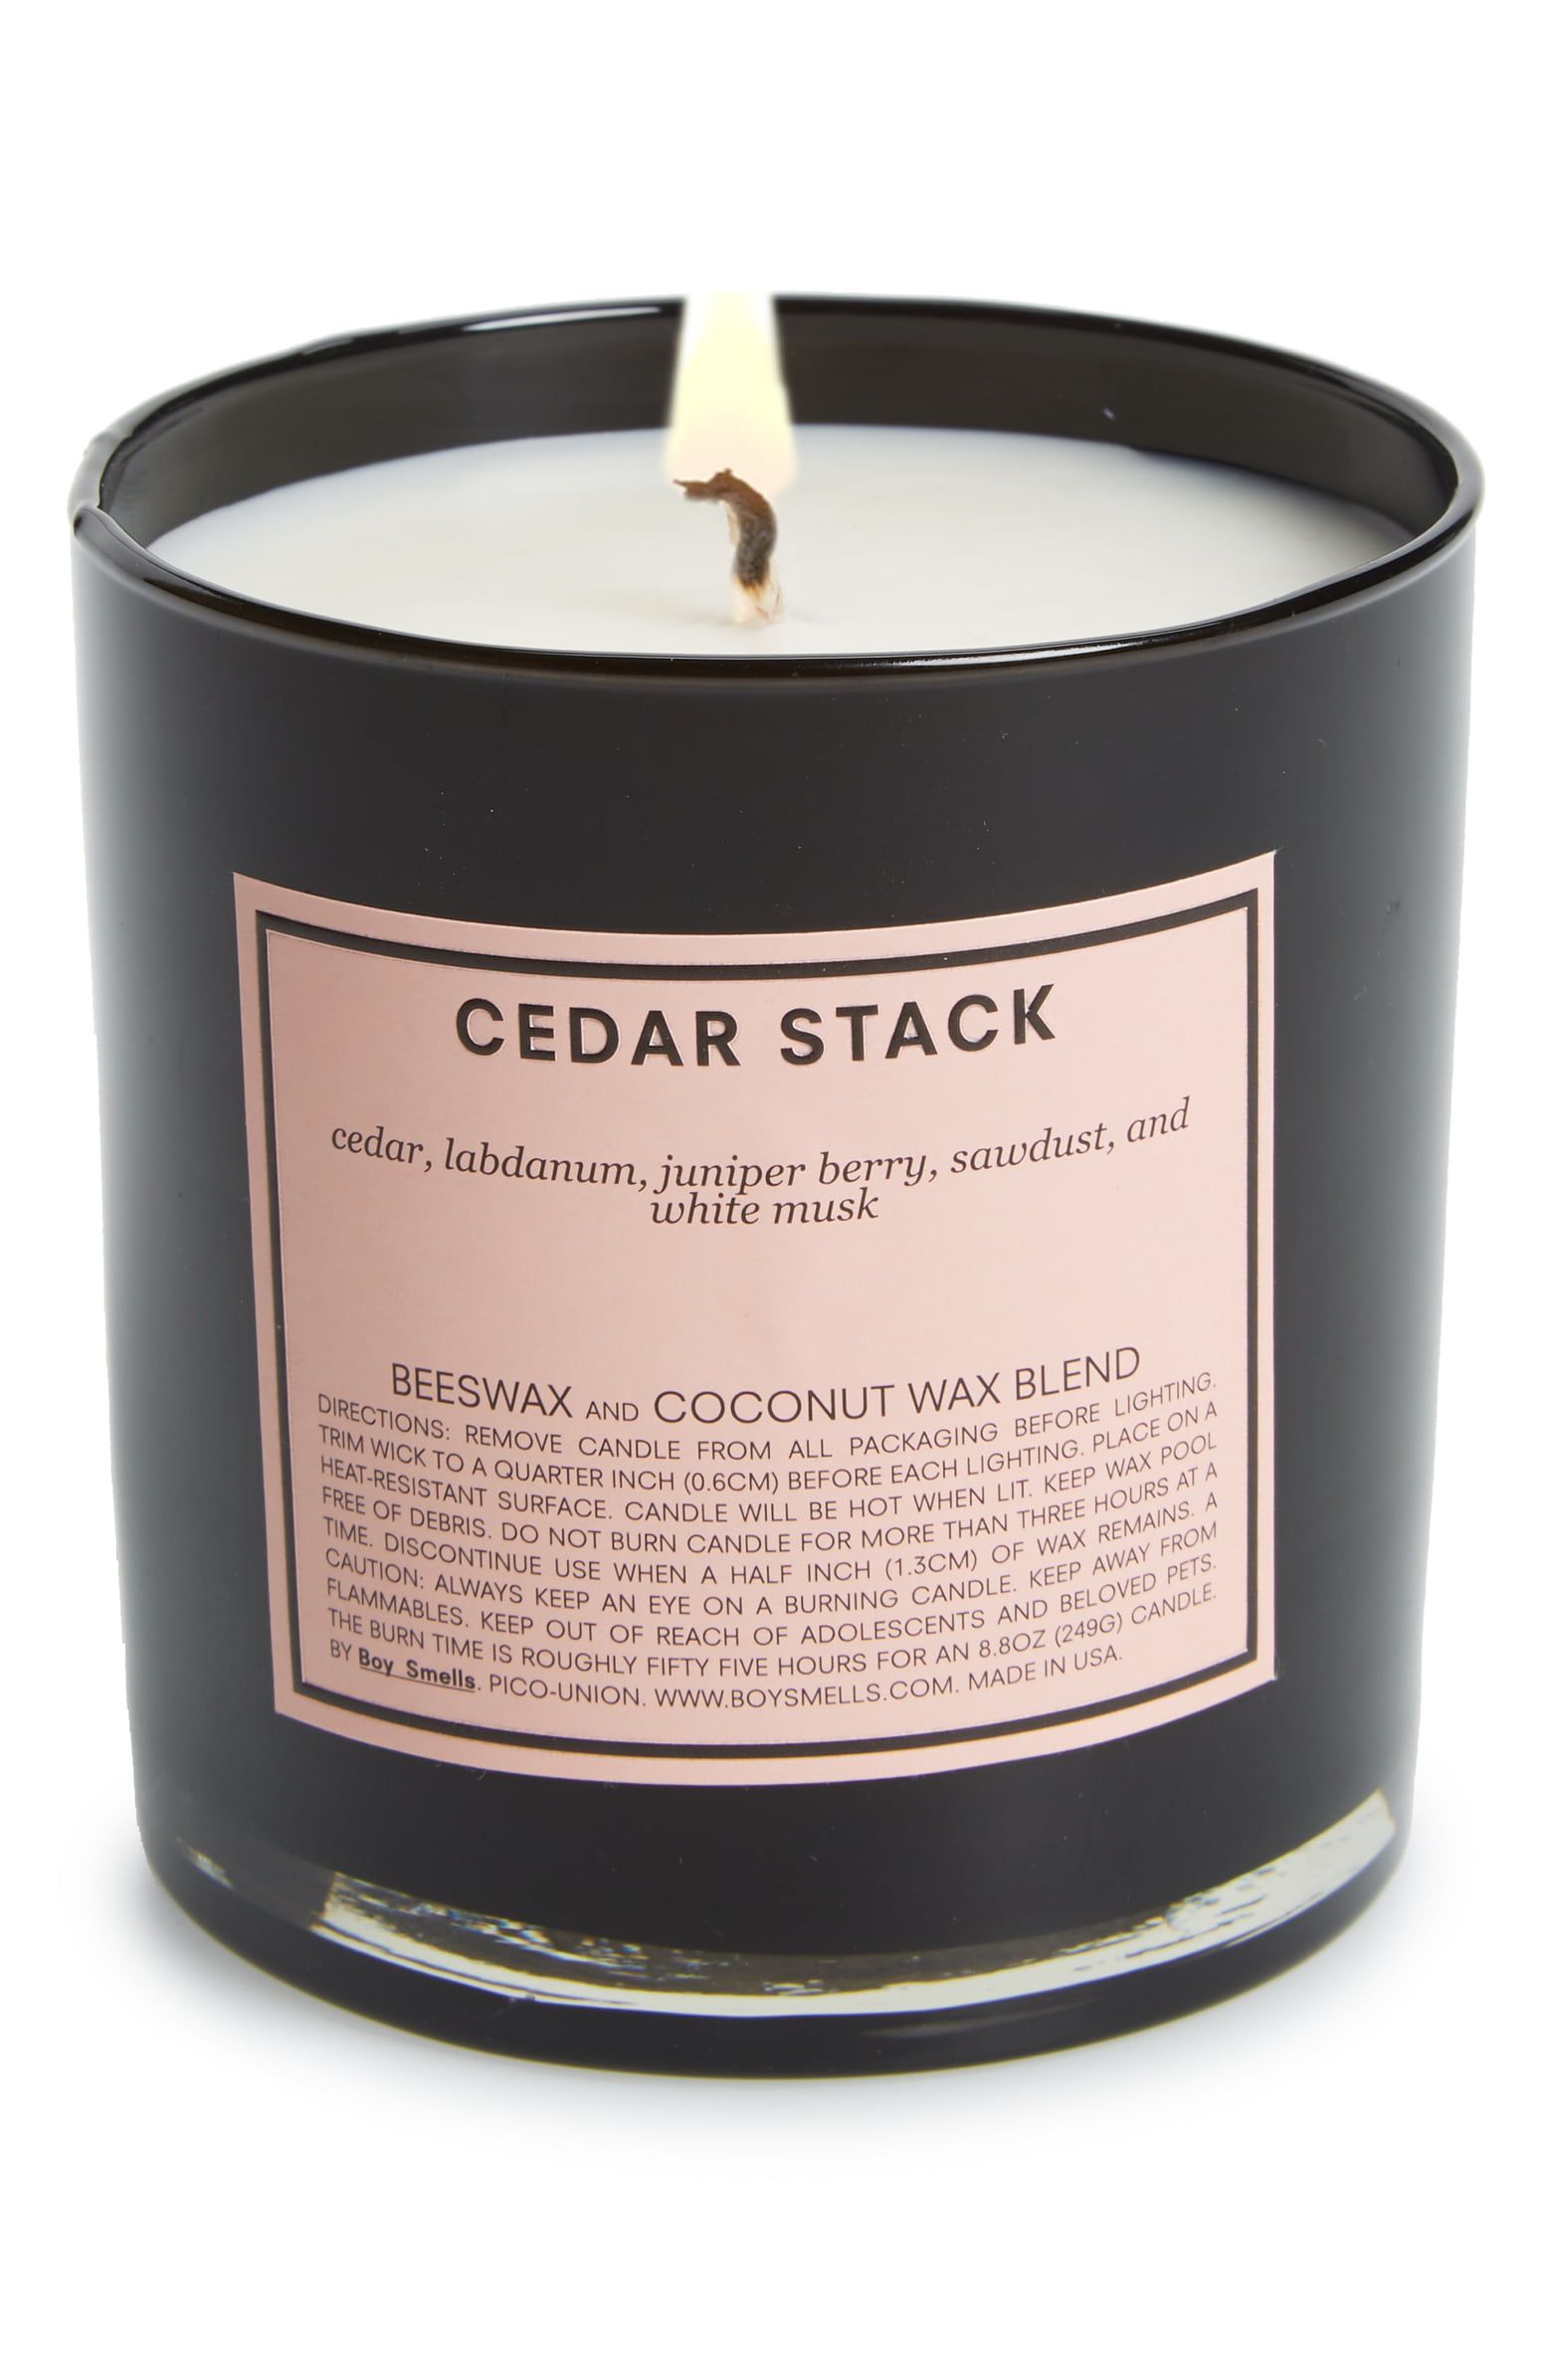 Candle that Smells Like Fireplace Inspirational Boy Smells Cedar Stack Scented Candle nordstrom